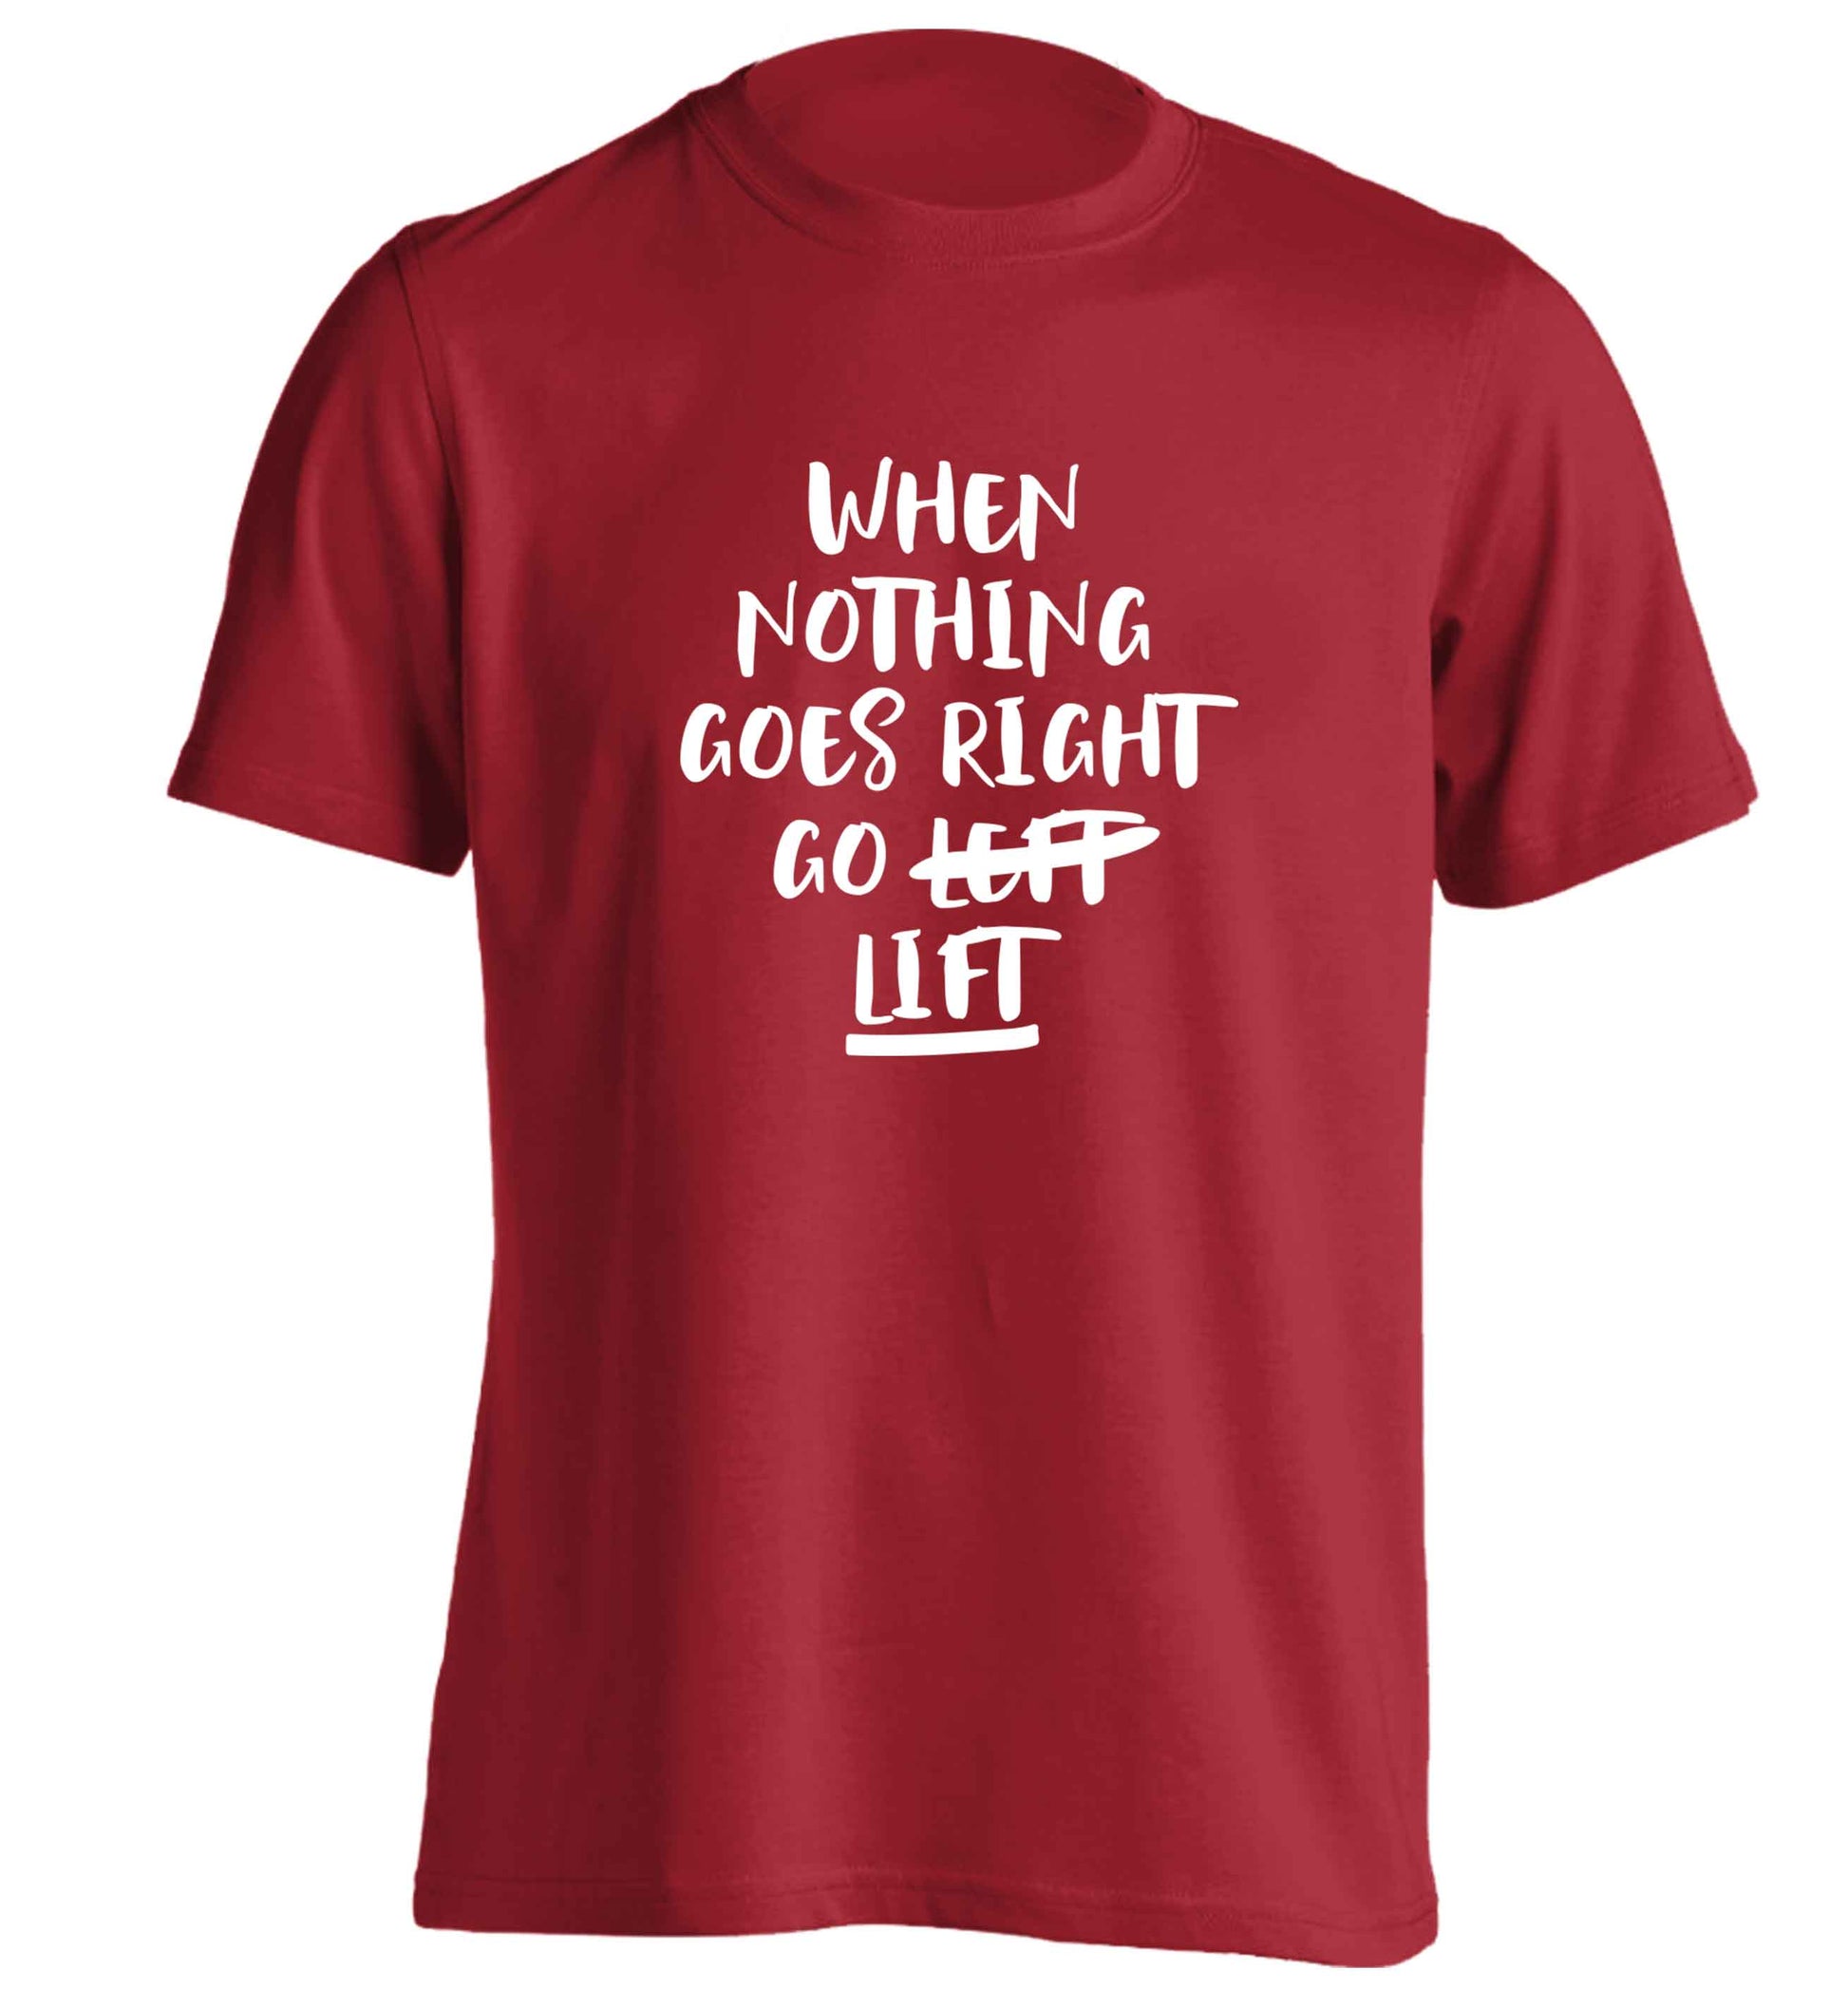 When nothing goes right go lift adults unisex red Tshirt 2XL